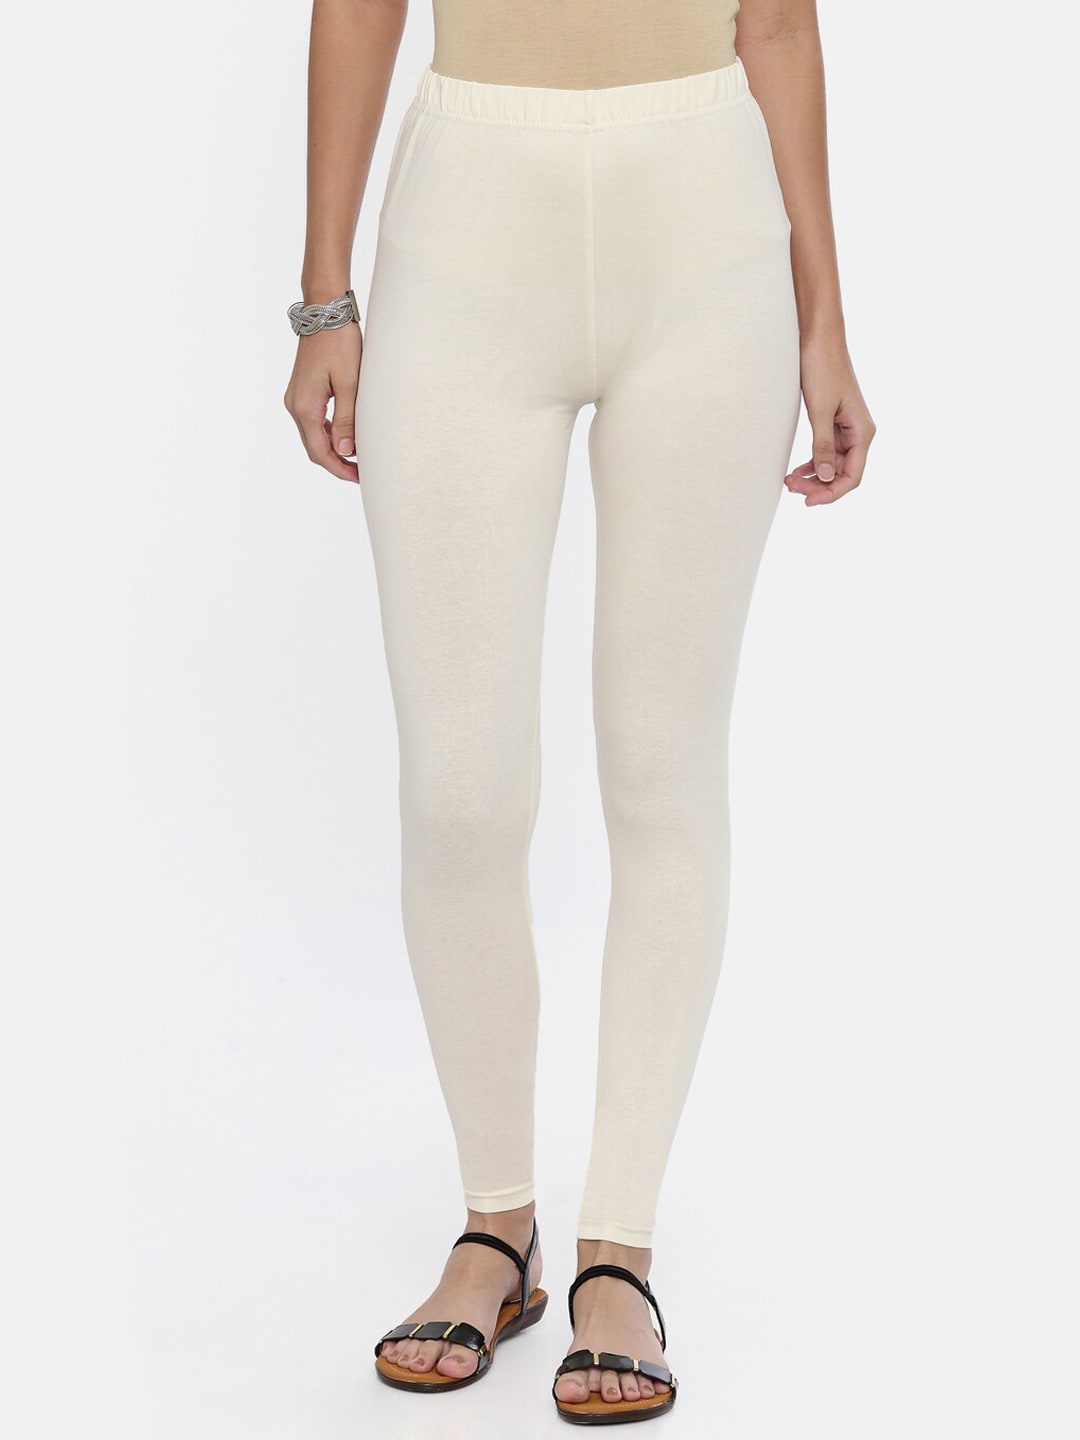 Souchii Cream-Coloured Solid Ankle-Length Leggings - Distacart